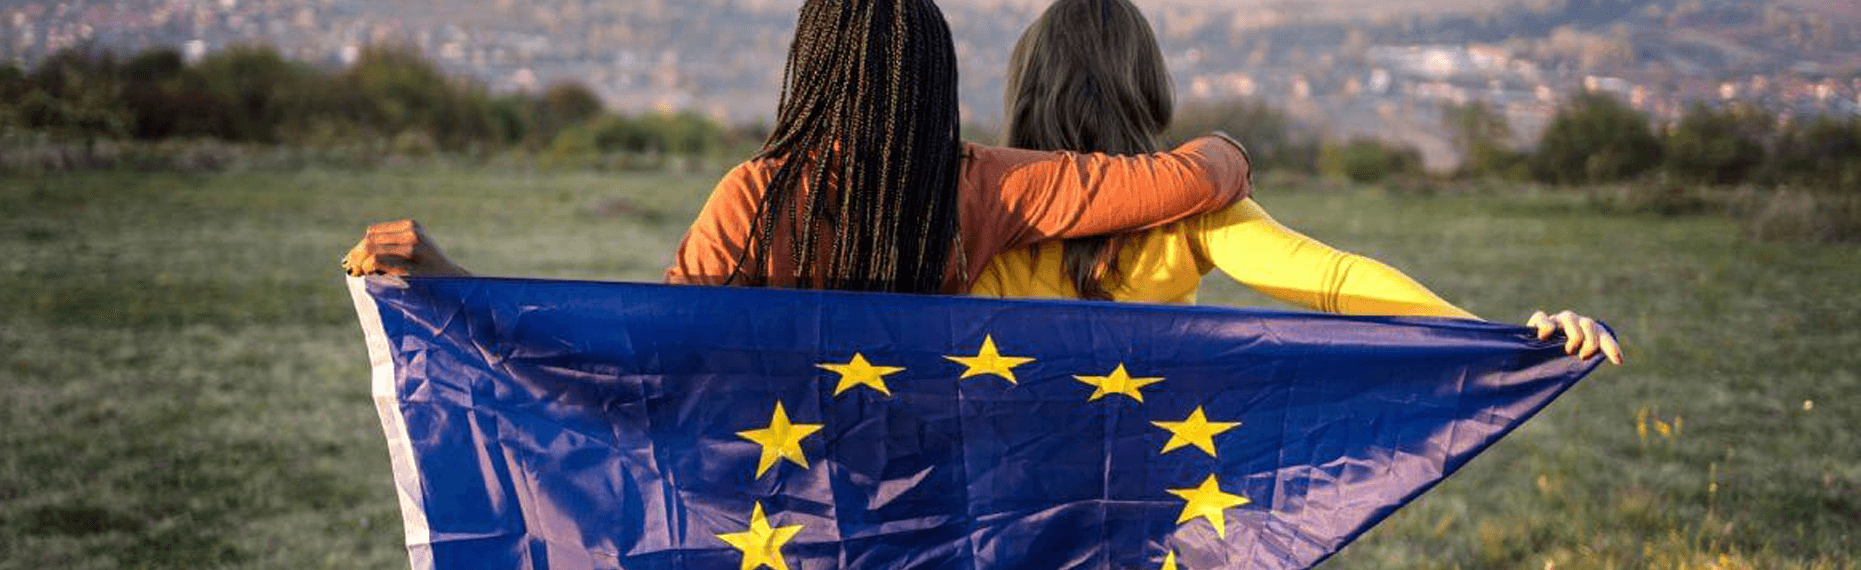 Two young people celebrating European Year of Youth